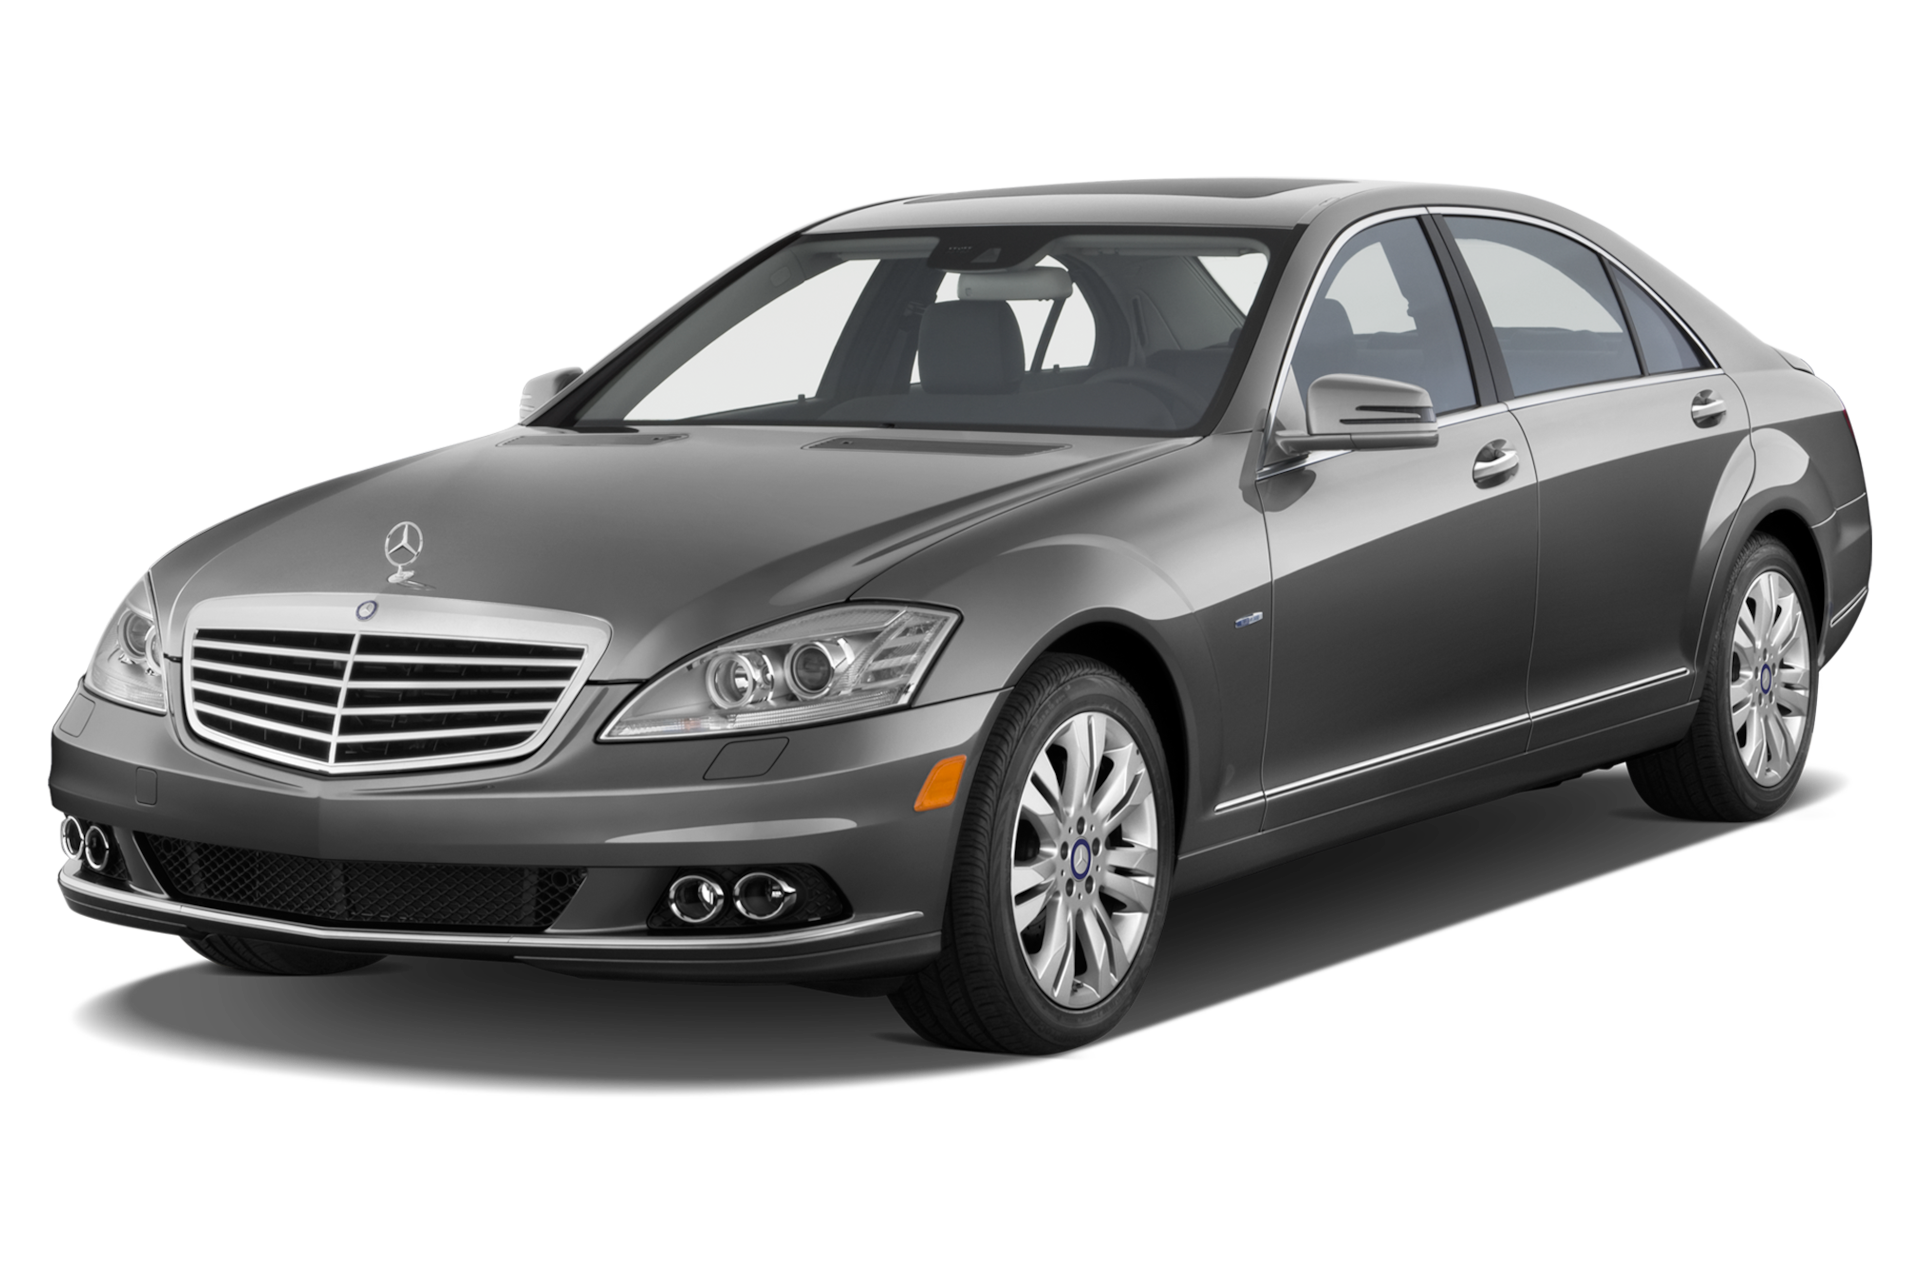 2011 Mercedes-Benz S-Class Prices, Reviews, and Photos - MotorTrend